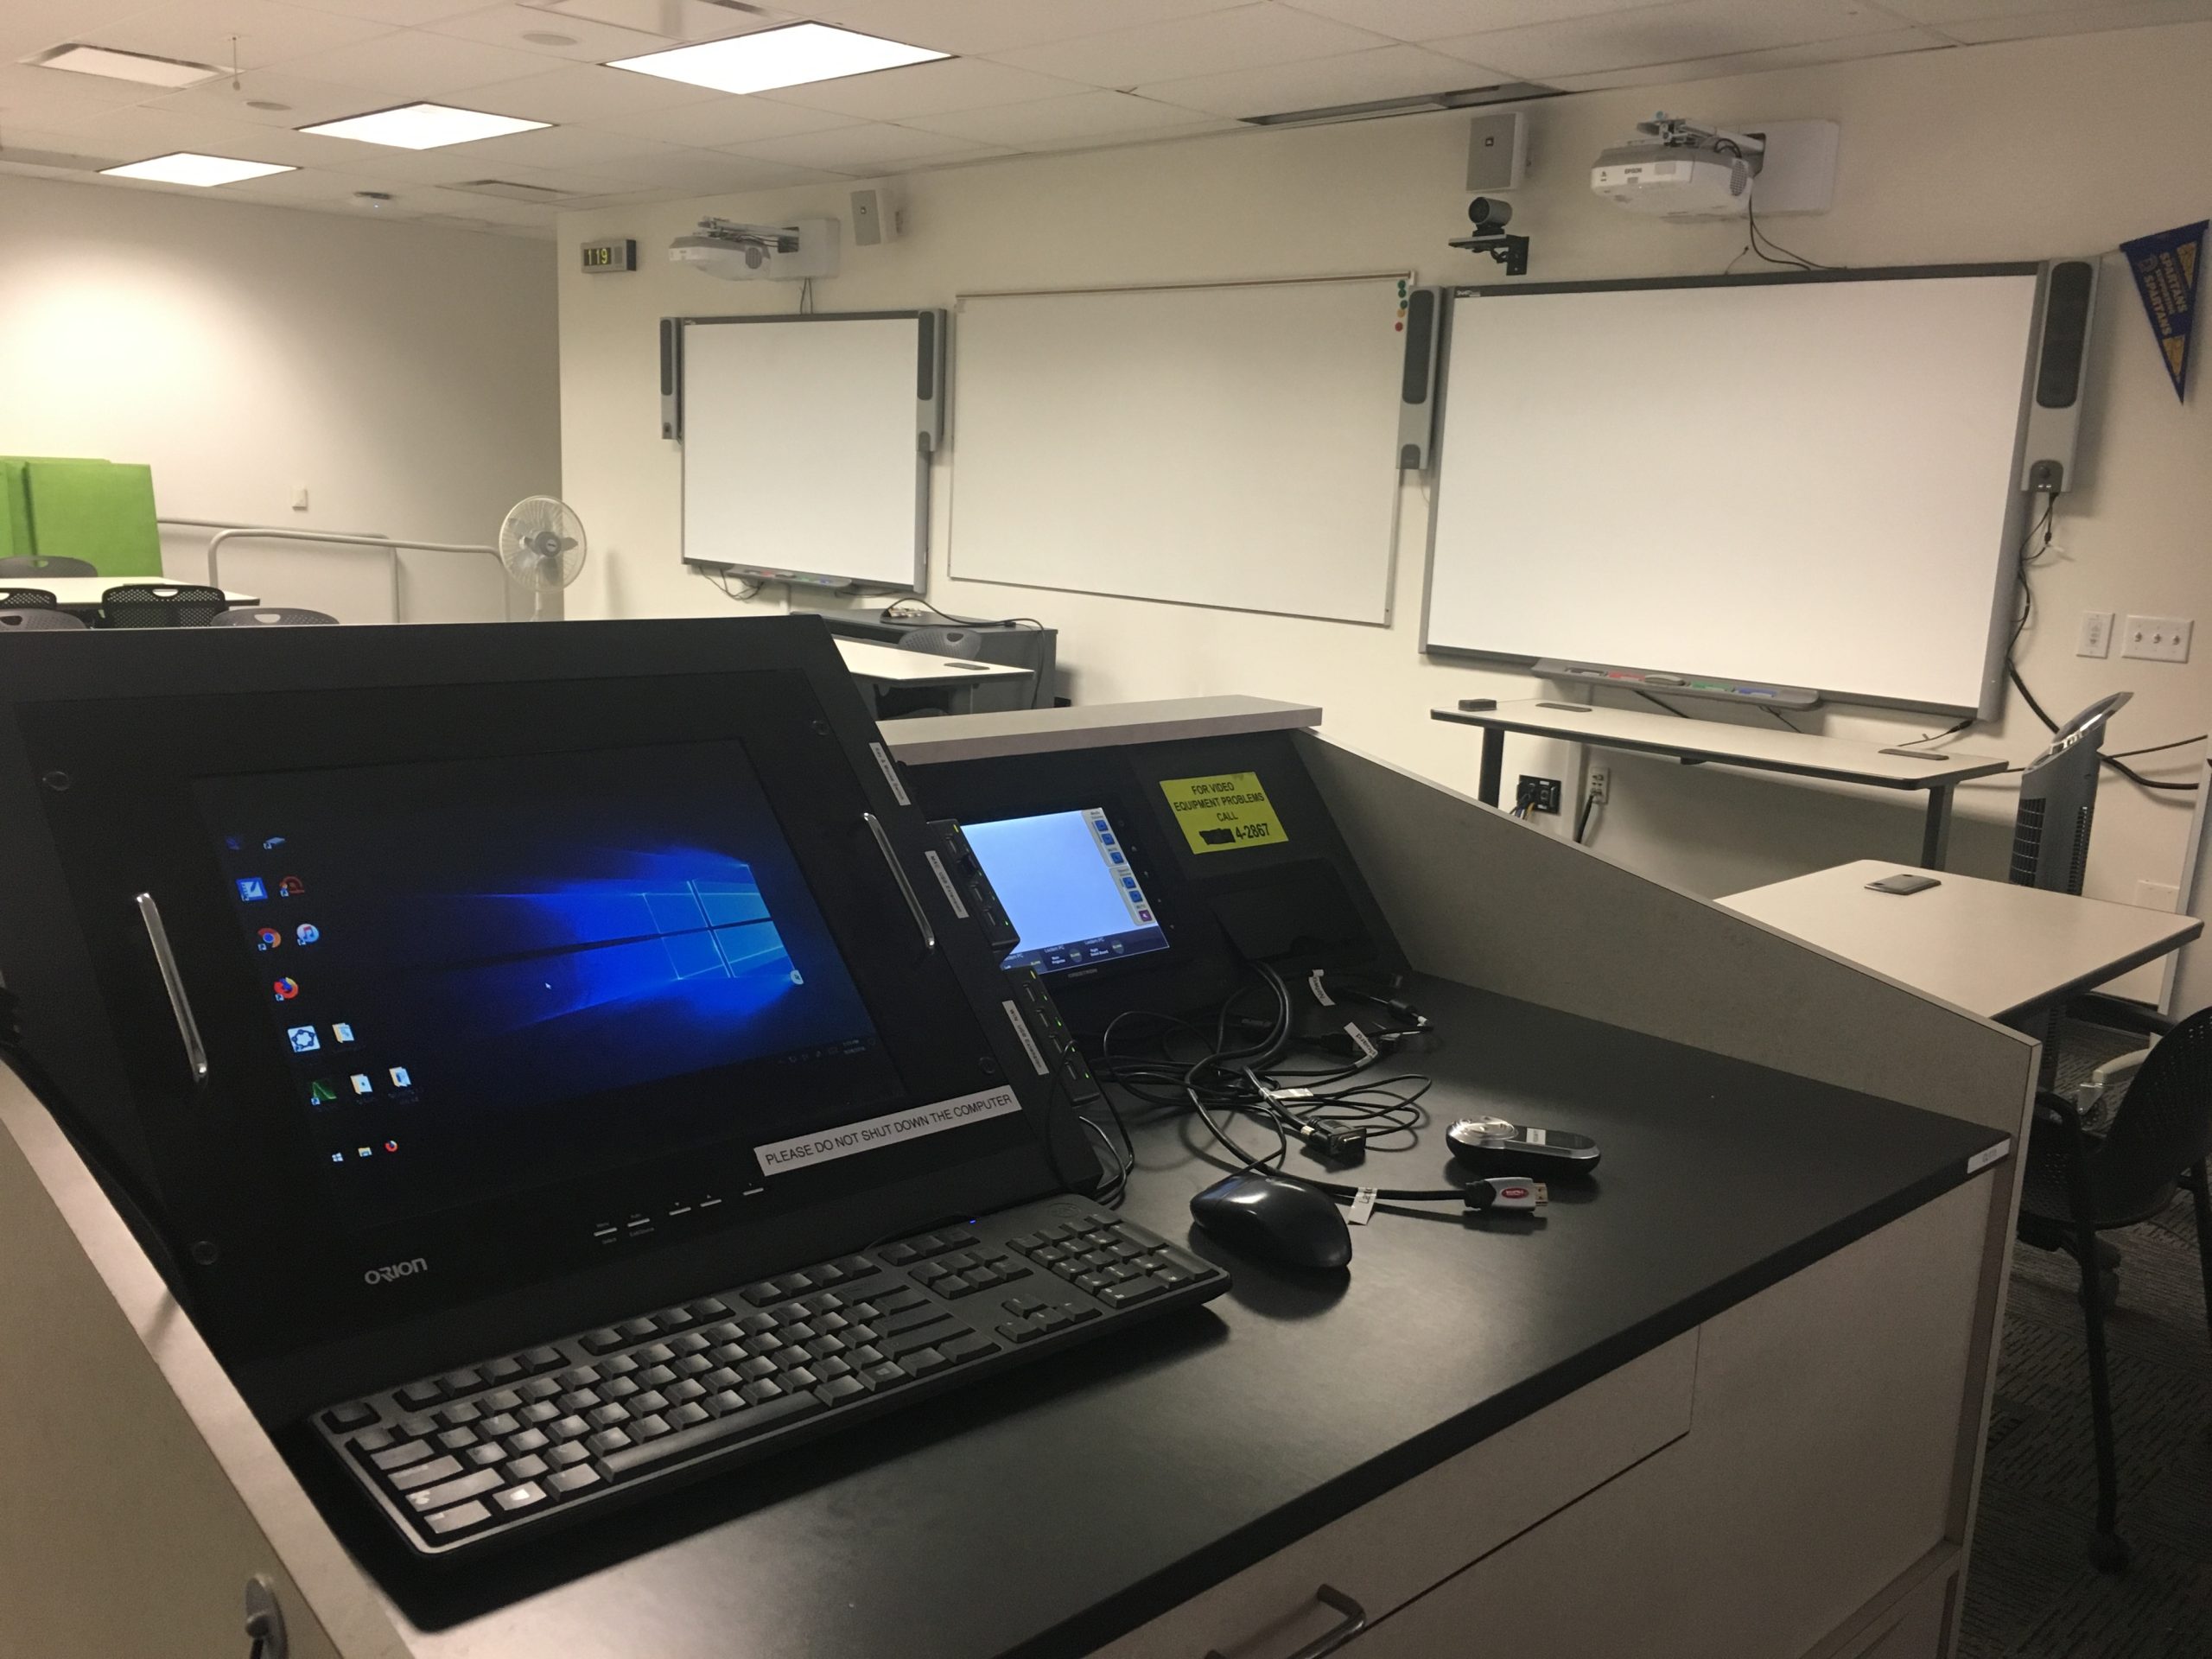 The inside of a Next Generation classroom, featuring a computer, tablet, projection screen, and two smart boards.